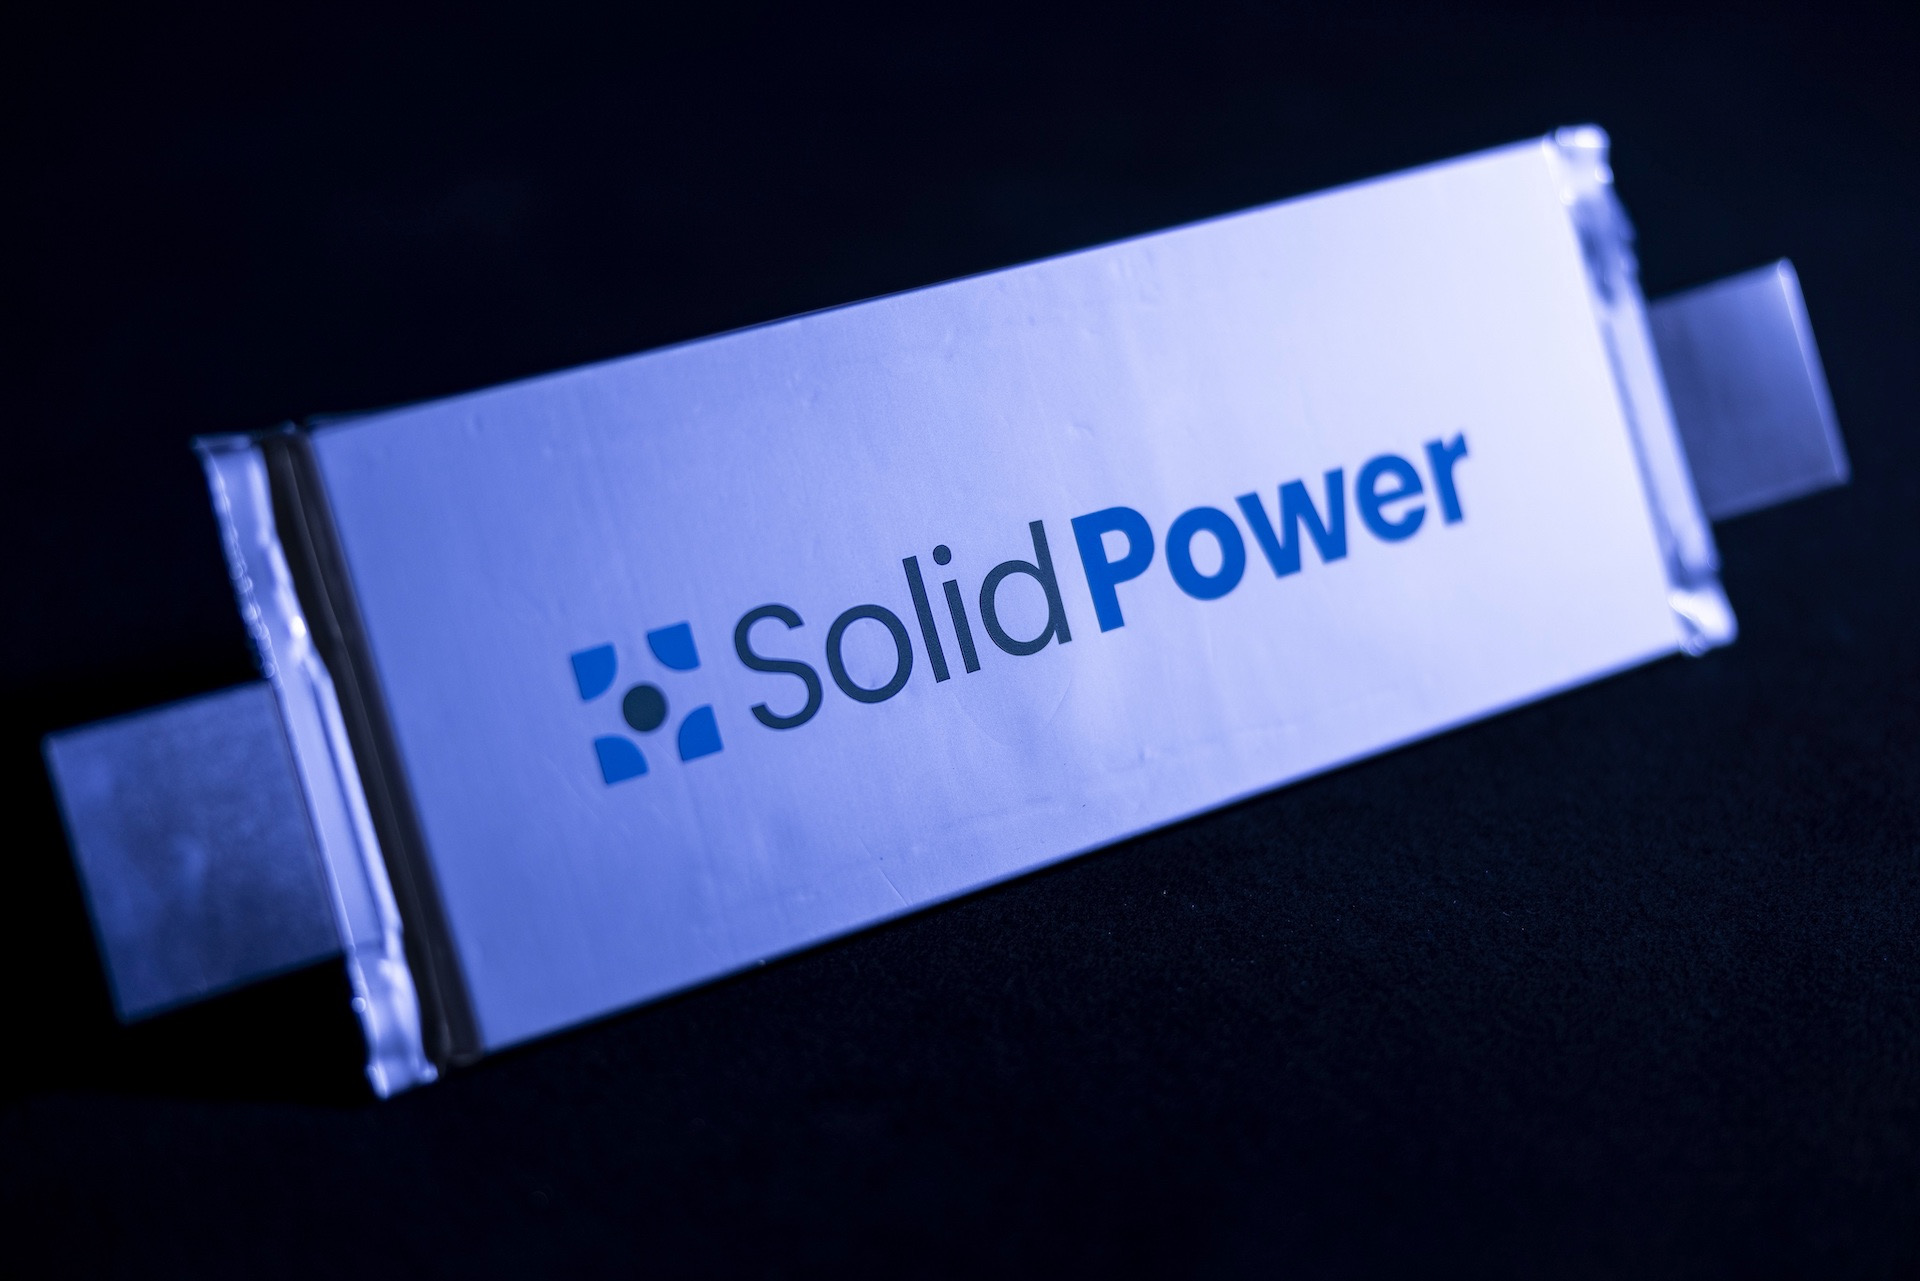 BMW expands solid-state battery development, partners with Solid Power